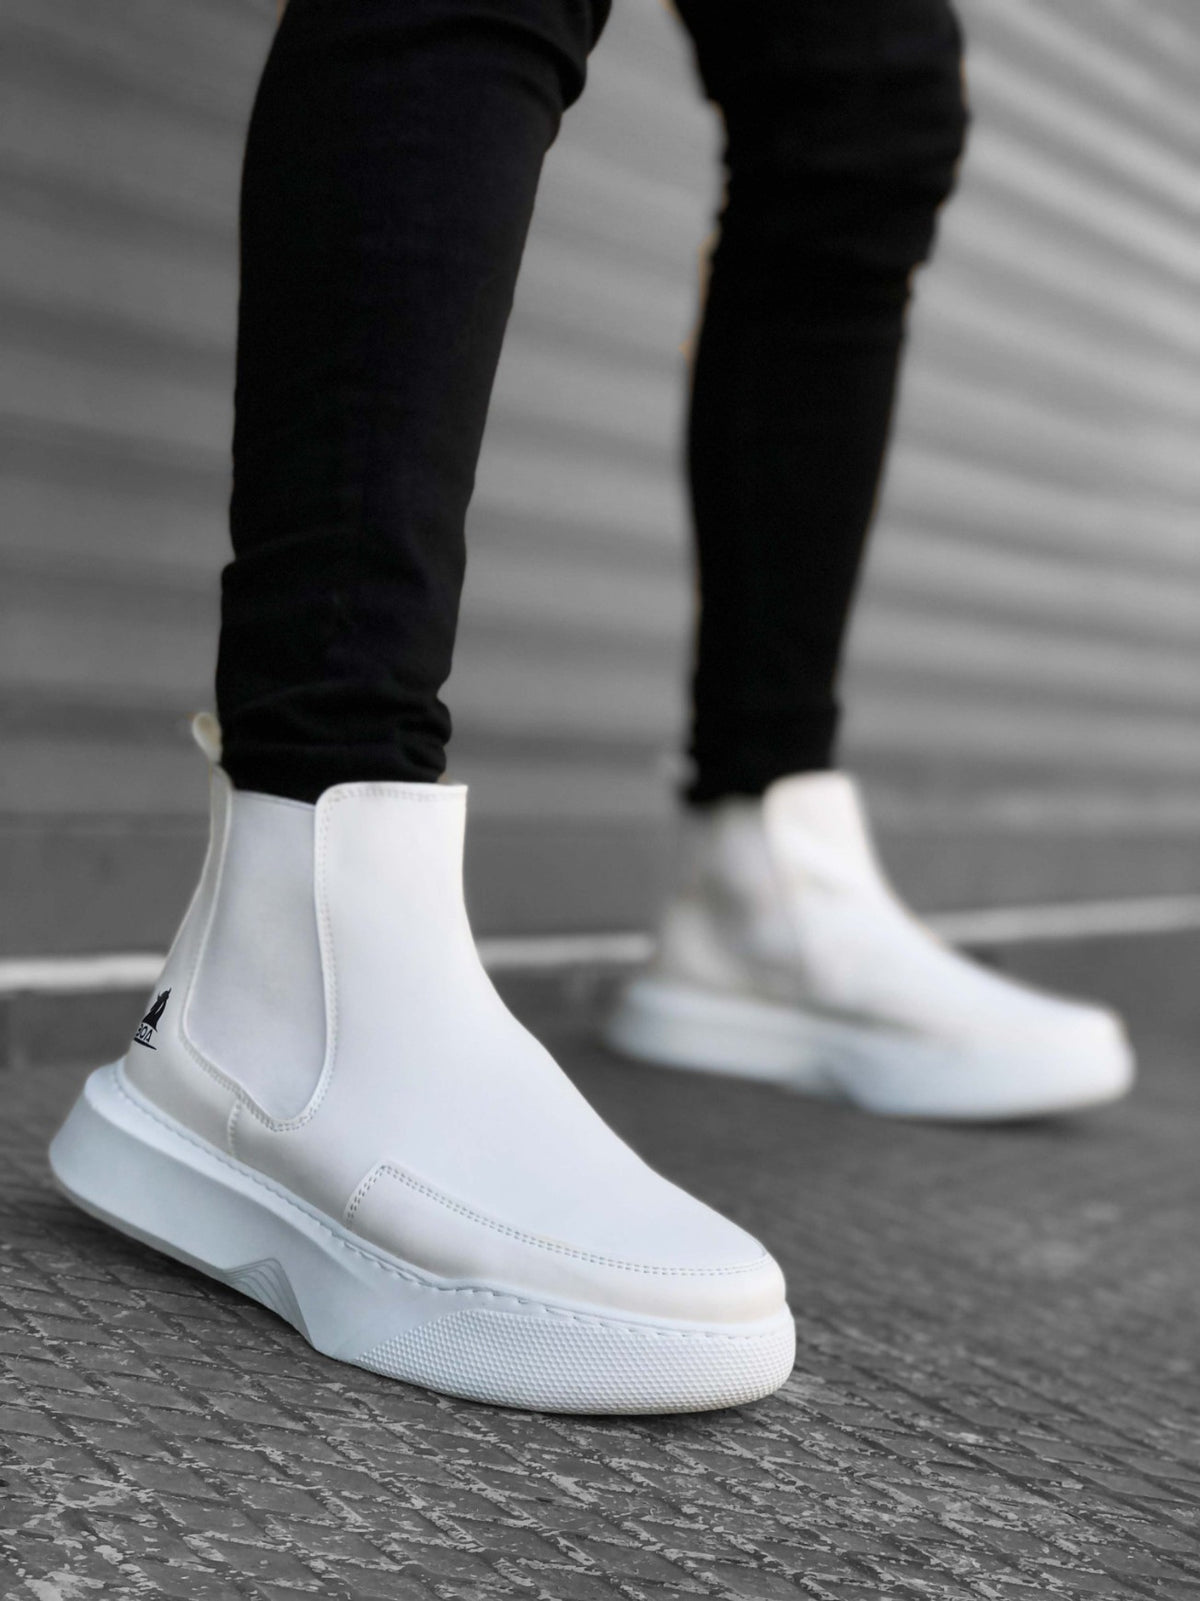 BA0150 Men's High Sole White Sport Boots With Lace-Up Band - STREETMODE™ DE